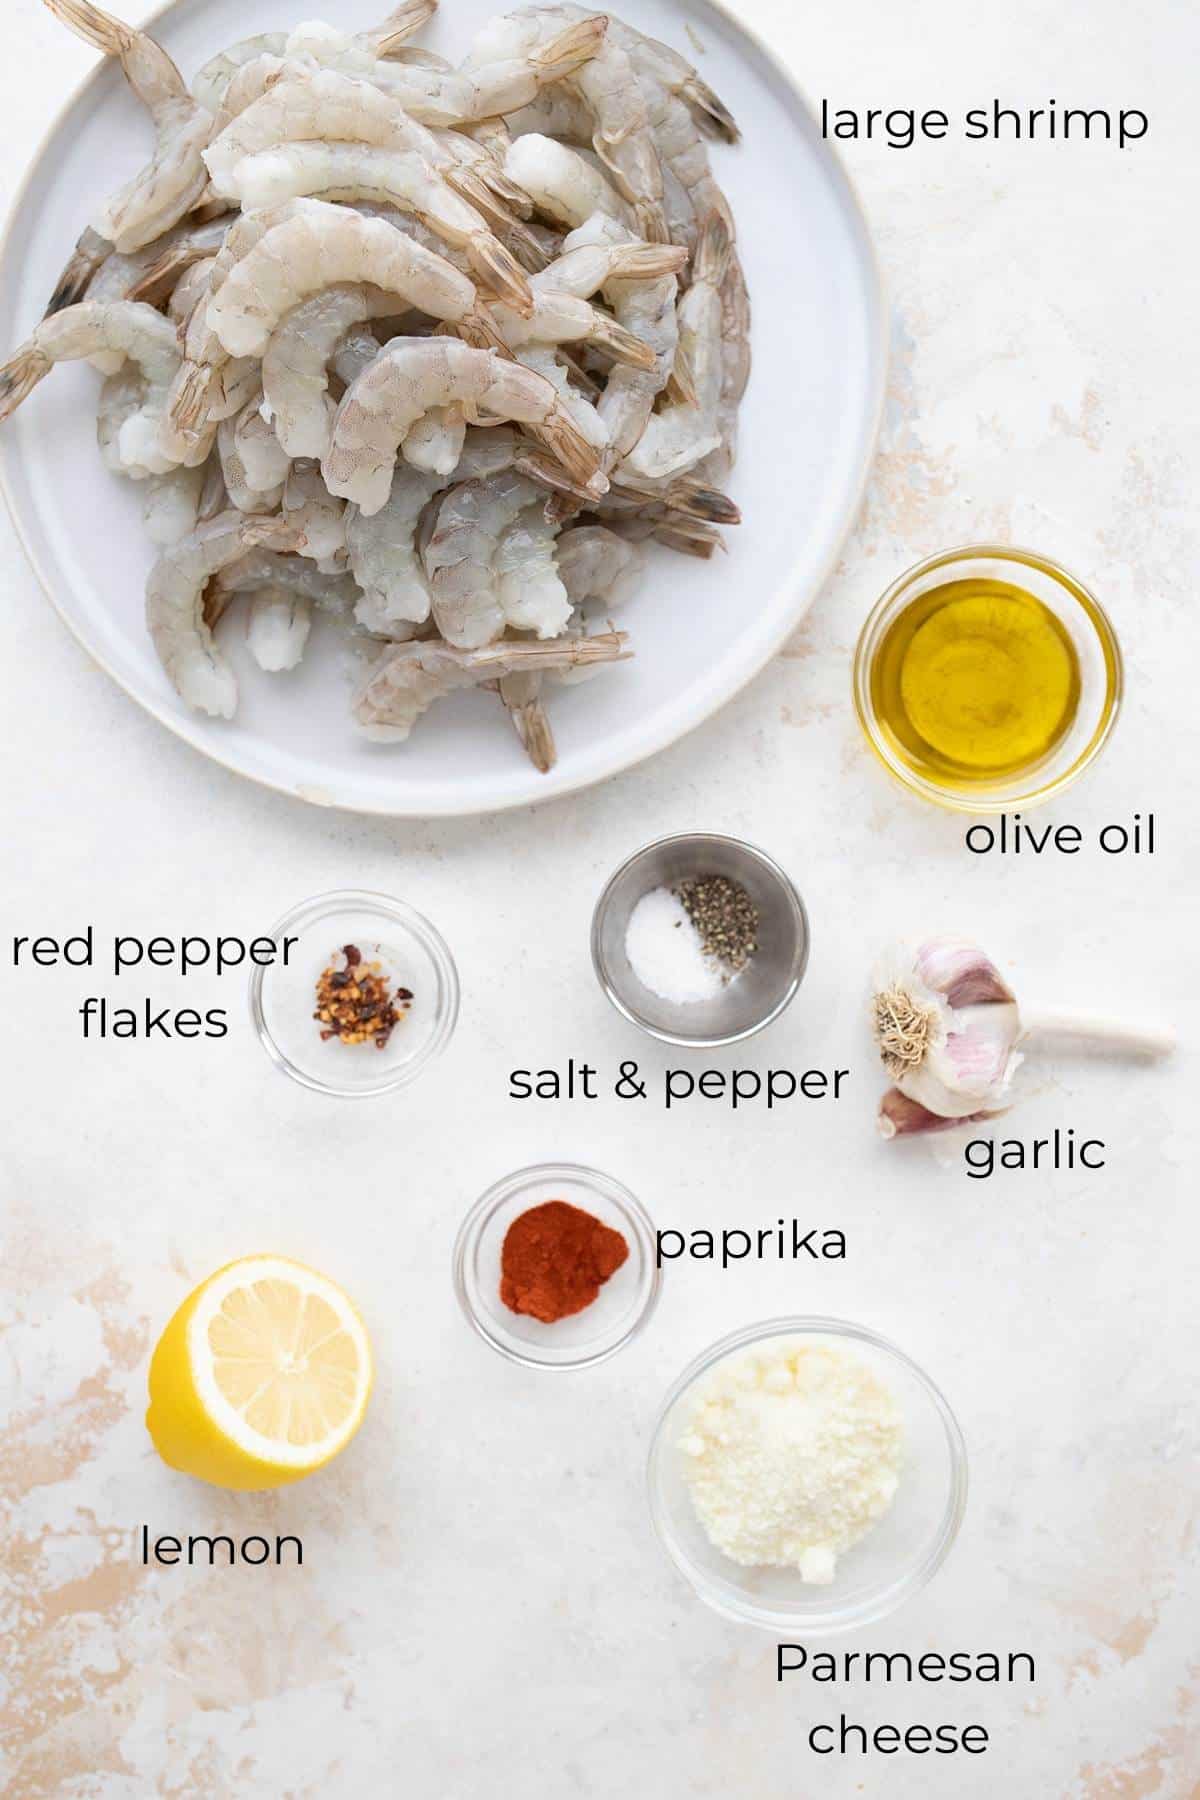 Top down image of the ingredients for Easy Baked Shrimp.